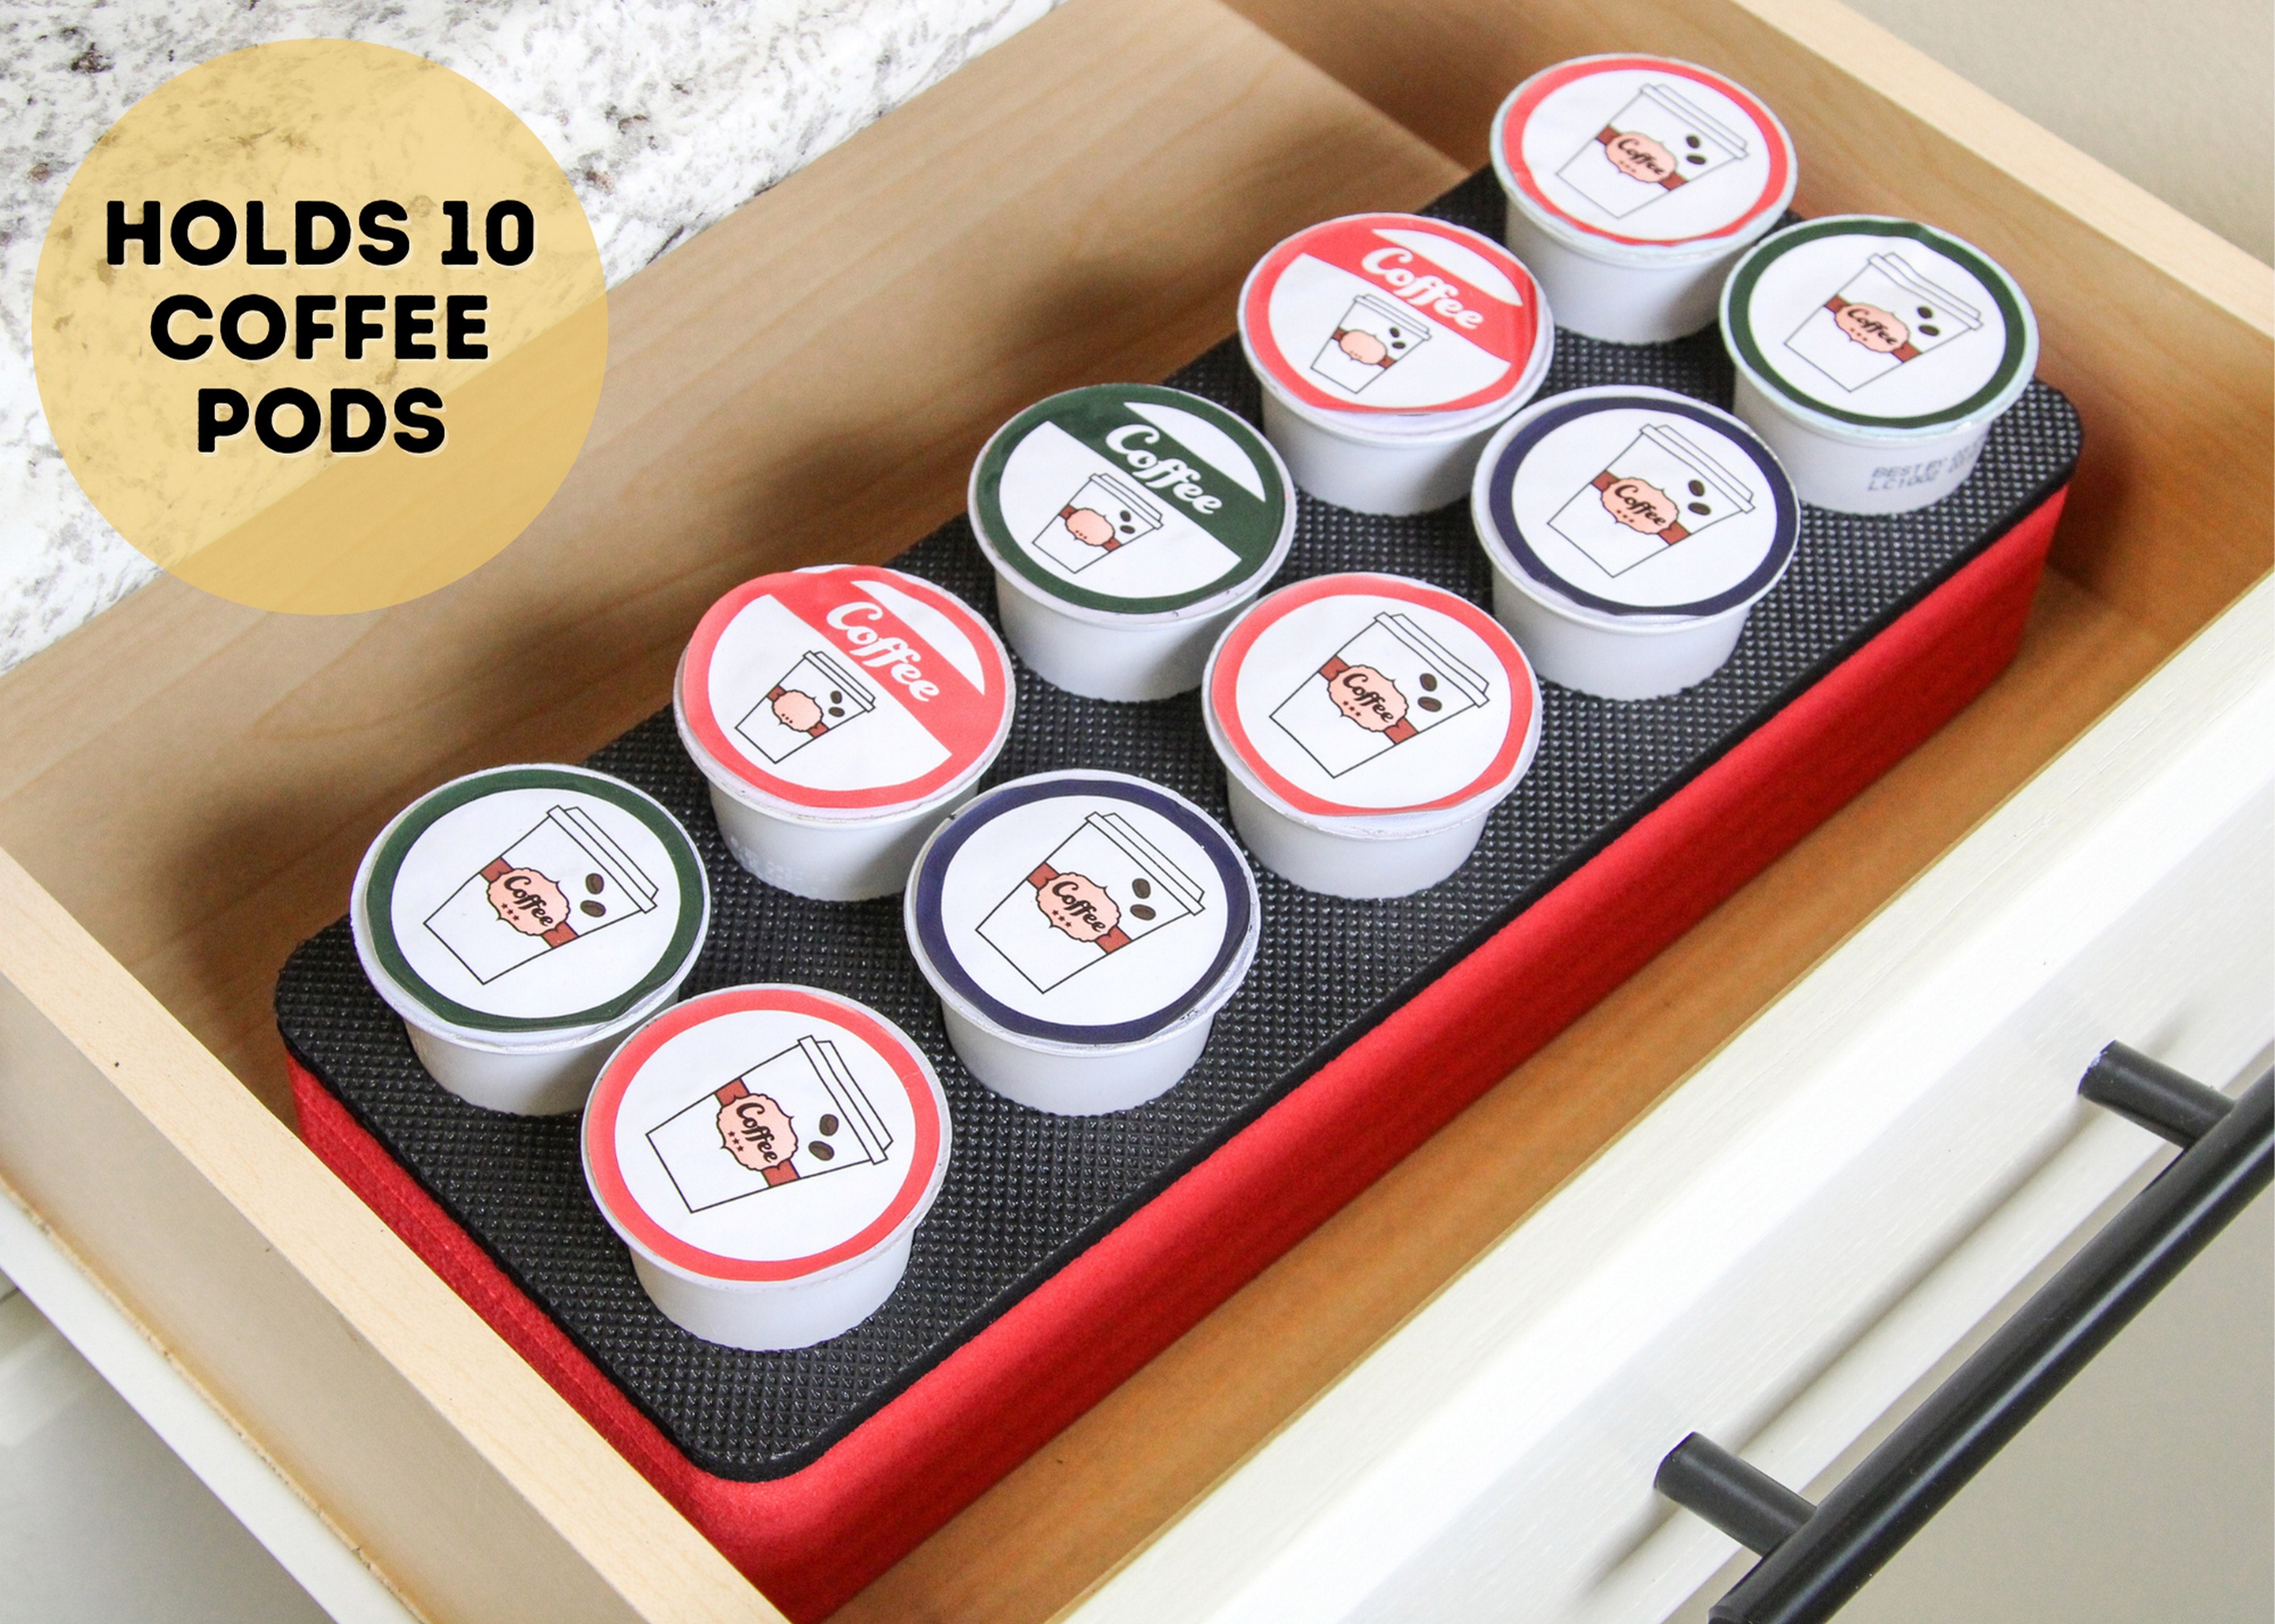 Coffee Red Pod Storage Deluxe Organizer Tray Drawer Insert for Kitchen Home Office Waterproof 4.5 X 11.75 Inches Holds 10 Compatible Keurig K-Cup